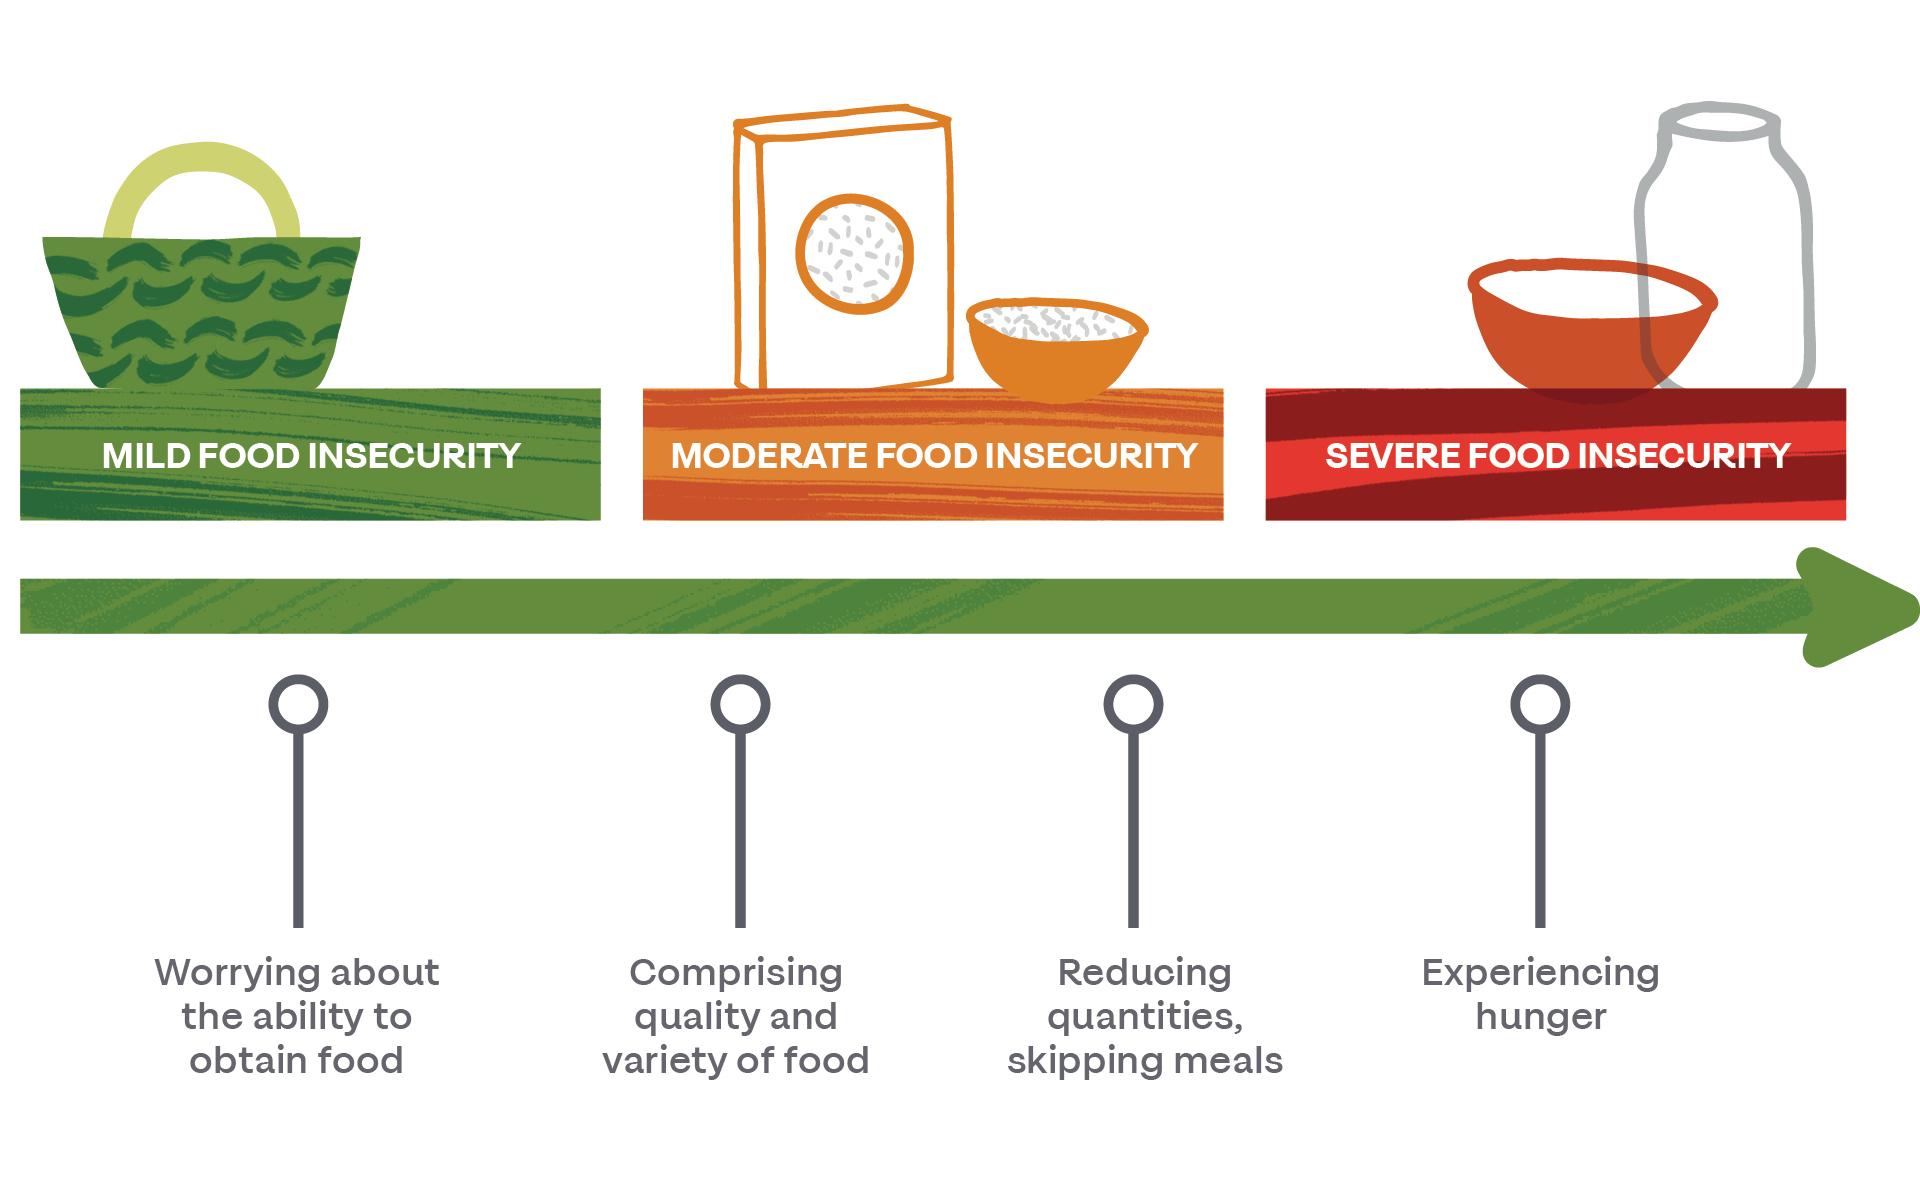 https://www.feedingliverpool.org/wp-content/uploads/2021/07/Food-Insecurity-Chart.jpg